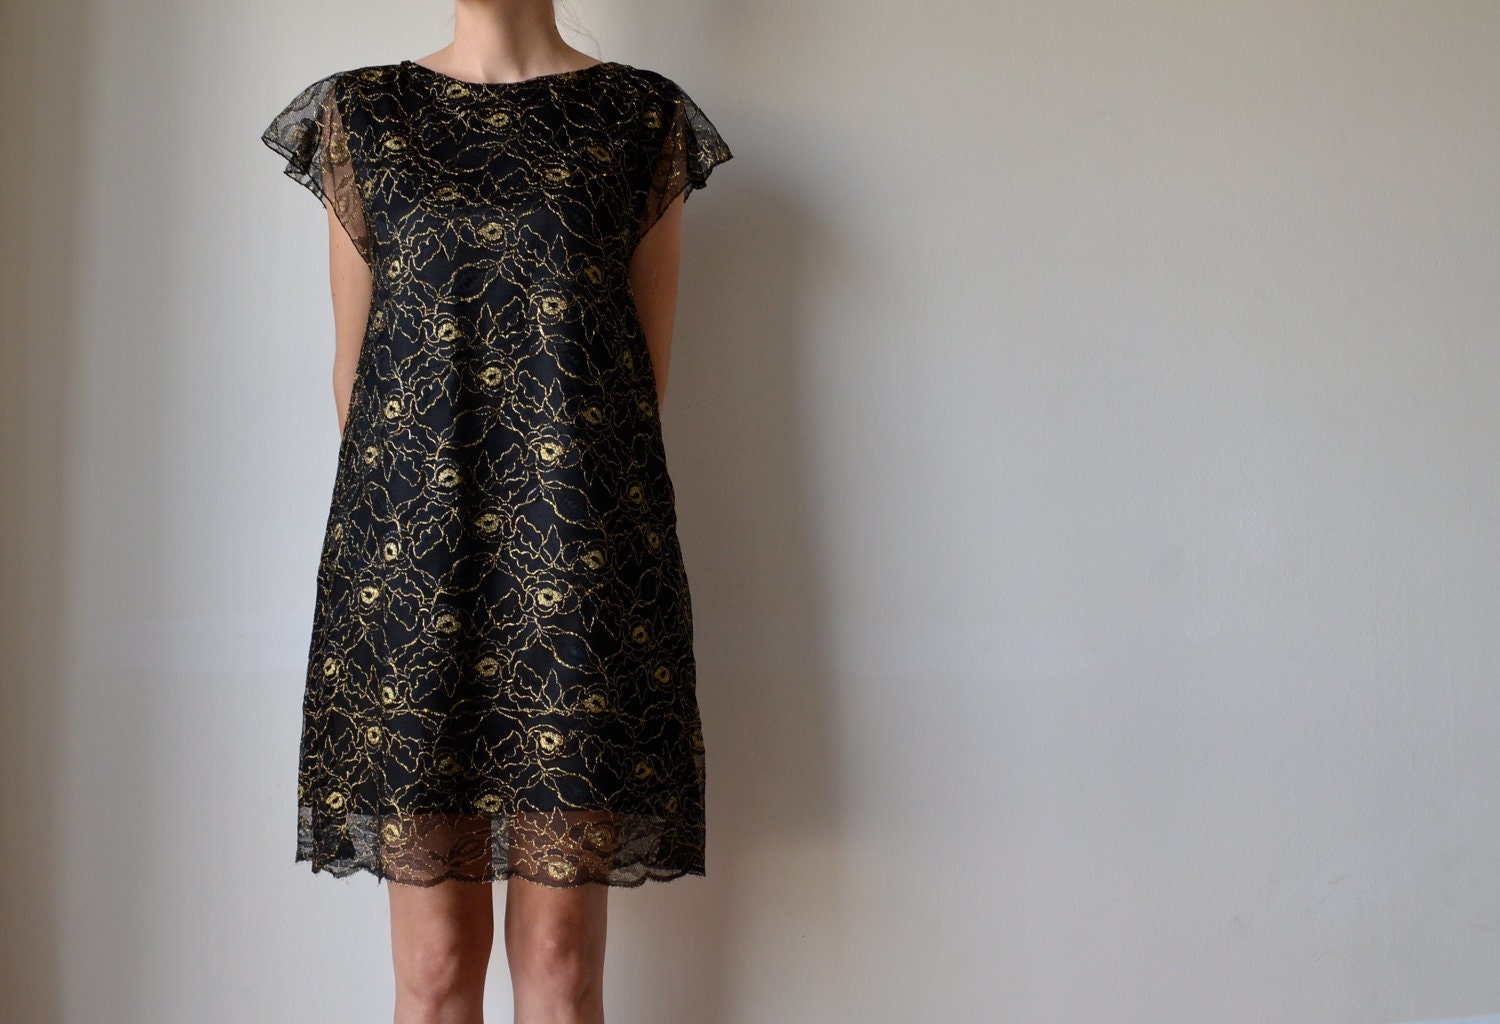 Black and gold womens lace tunic shift dress with fluttery cap sleeves. Fully lined. Size M - MuguetMilan